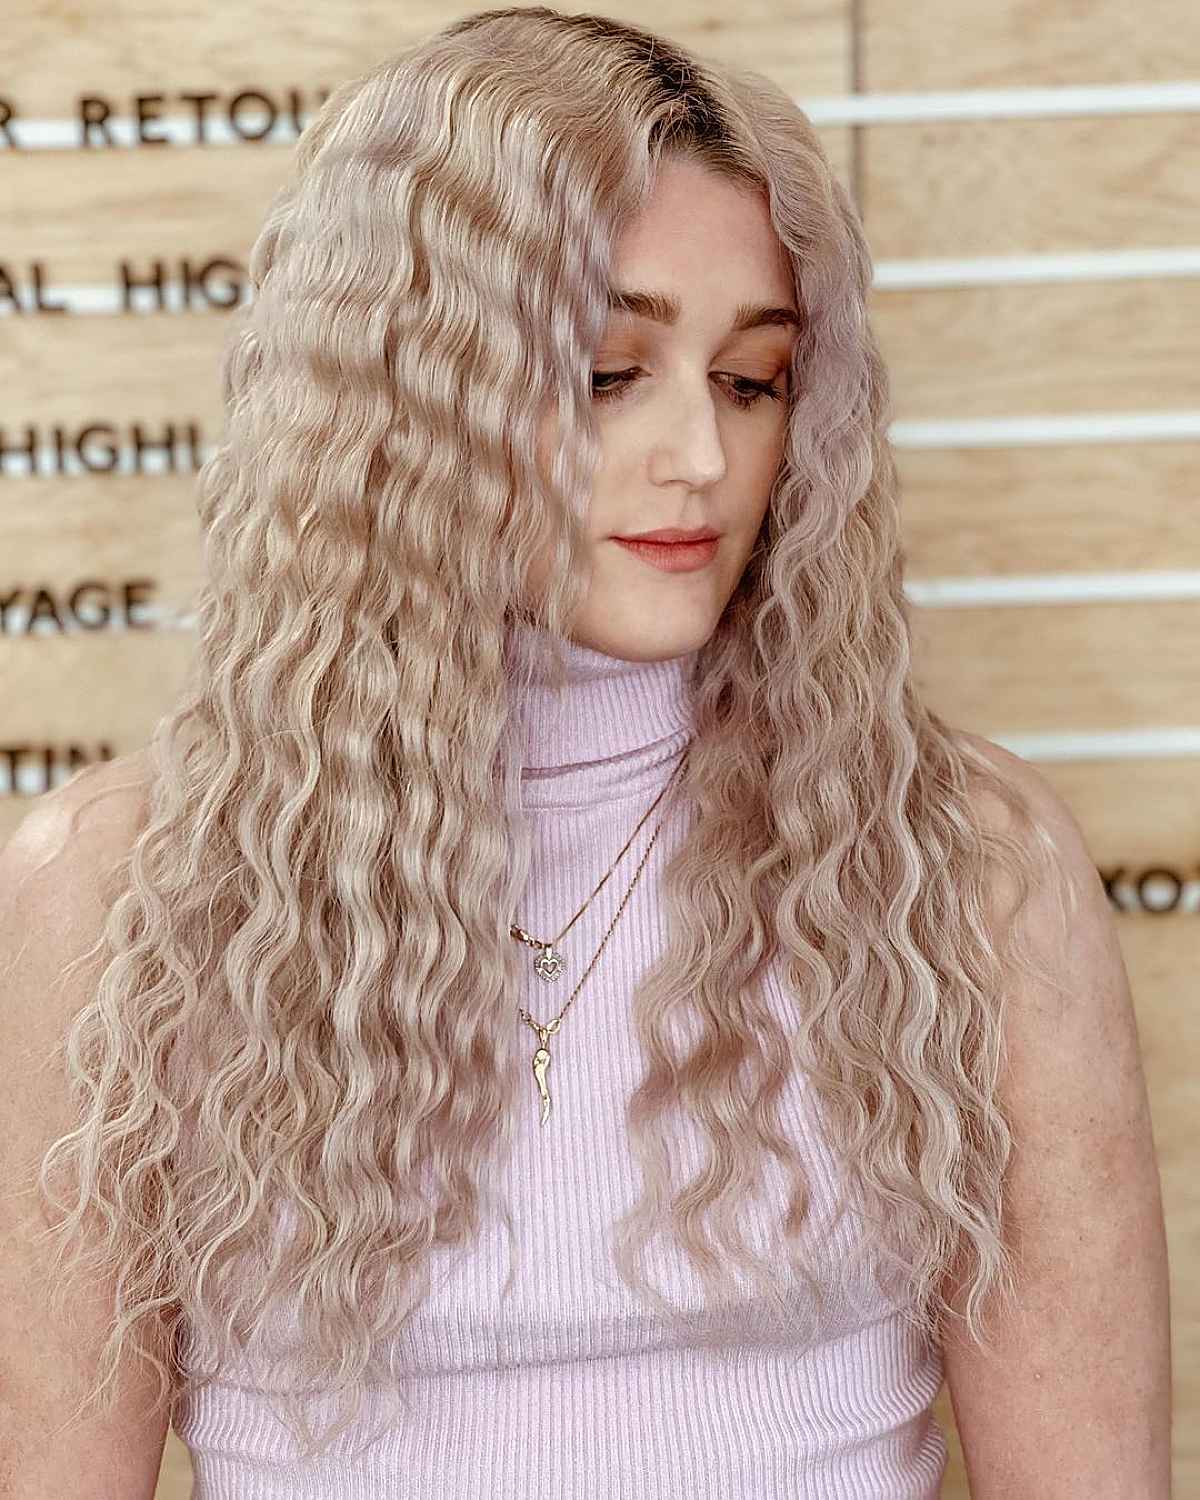 20 Best Crimped Hairstyles That Look Amazing | Crimped hair, Long hair  styles, Funky hairstyles